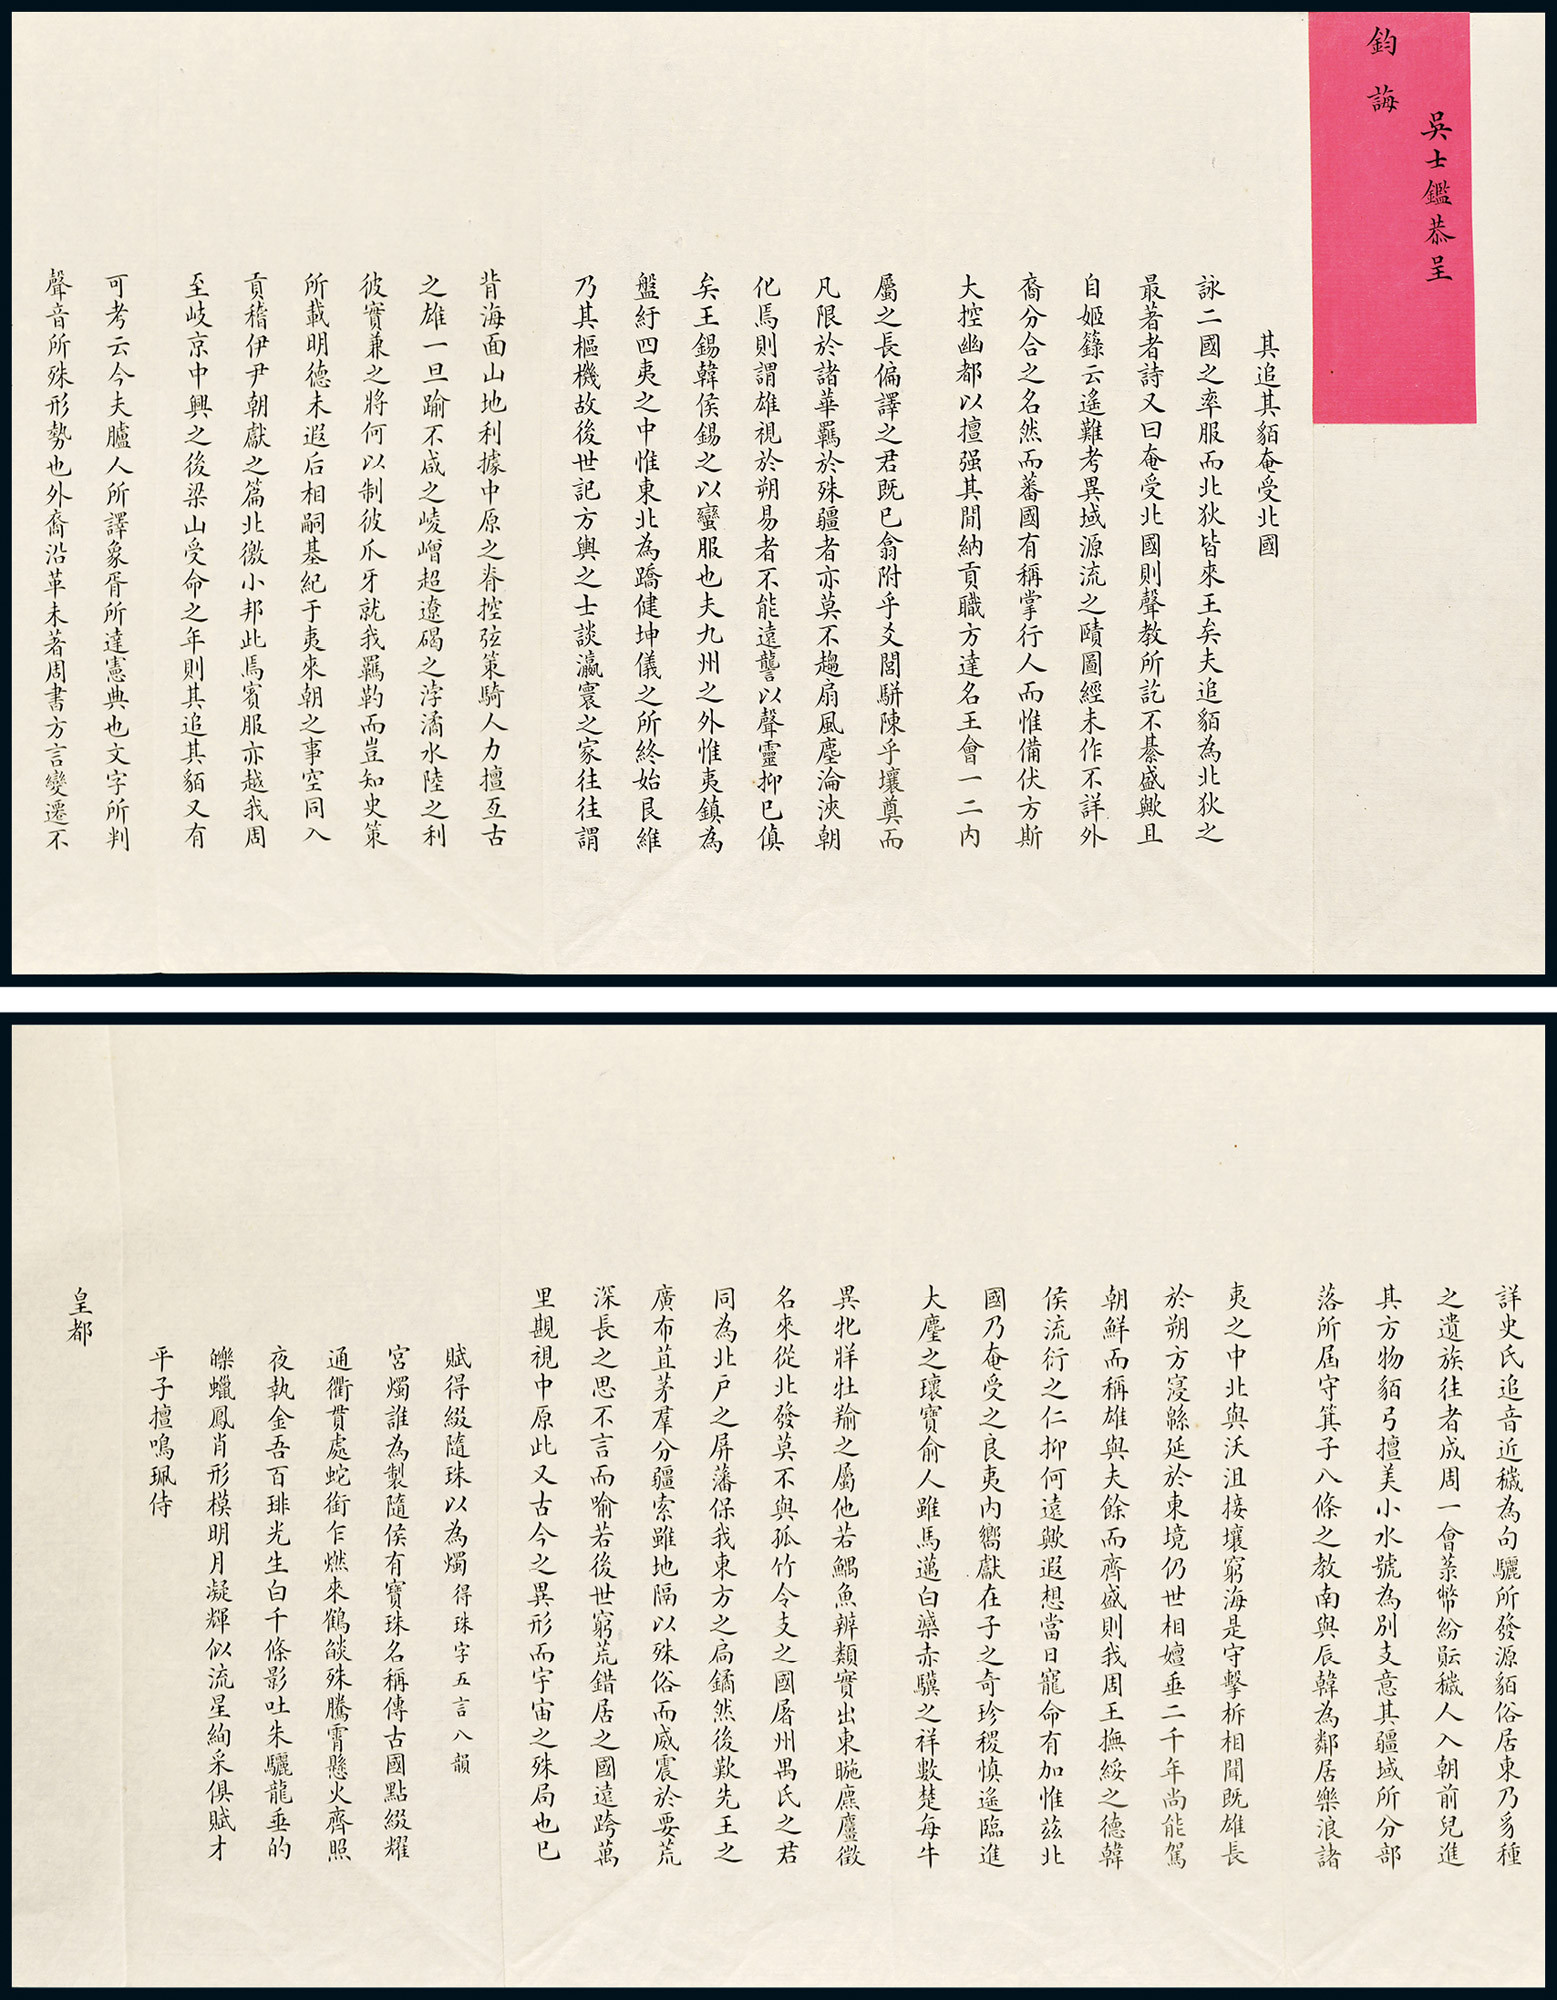 Ching Dynasty palace test paper roll presented to Emperor by Wu Shih-chien